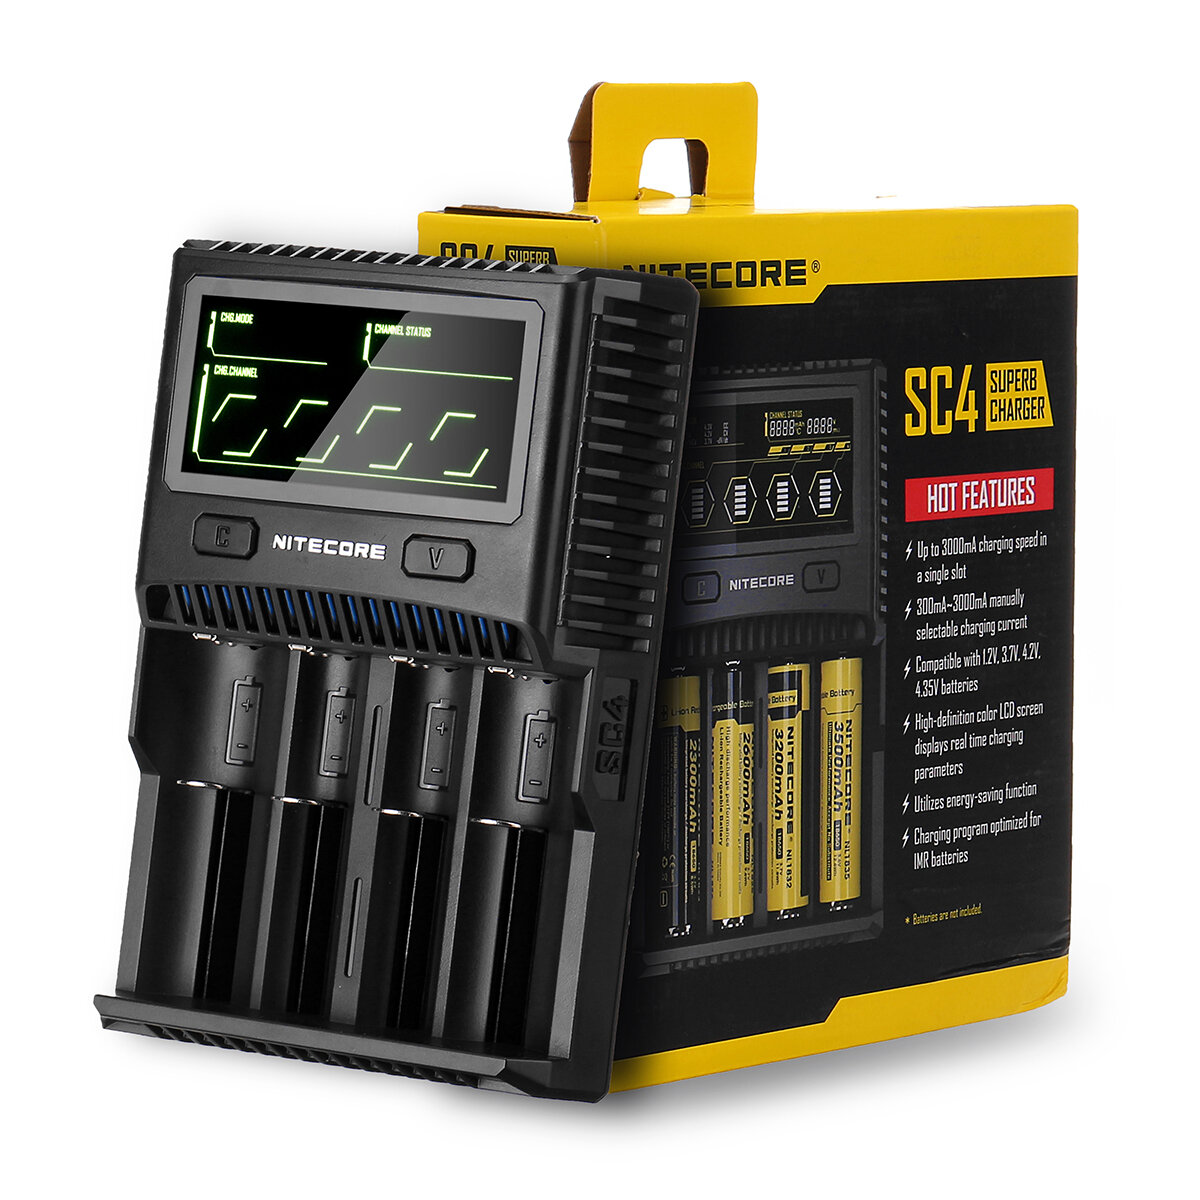 Nitecore SC4 3A Fast Charge LCD Intelligent Battery Charger Super for Li-ion IMR LiFePO4 Batteries For Flashlight RC Toys Home Tools